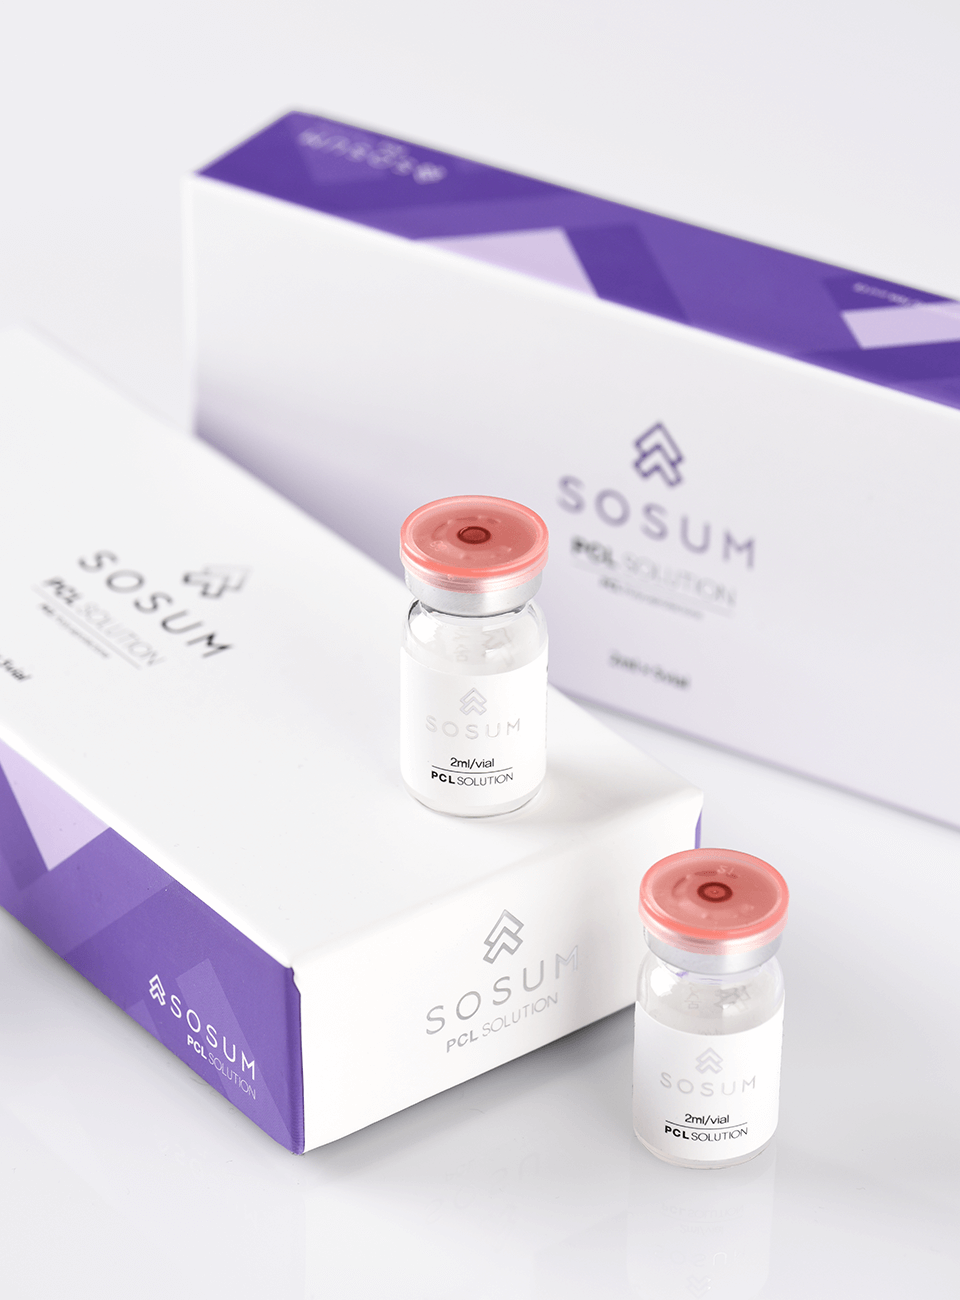 Sosum PCL Solution, an advanced bioresorbable polymer for aesthetic enhancement, offered by Official Sosum Distributors UAE